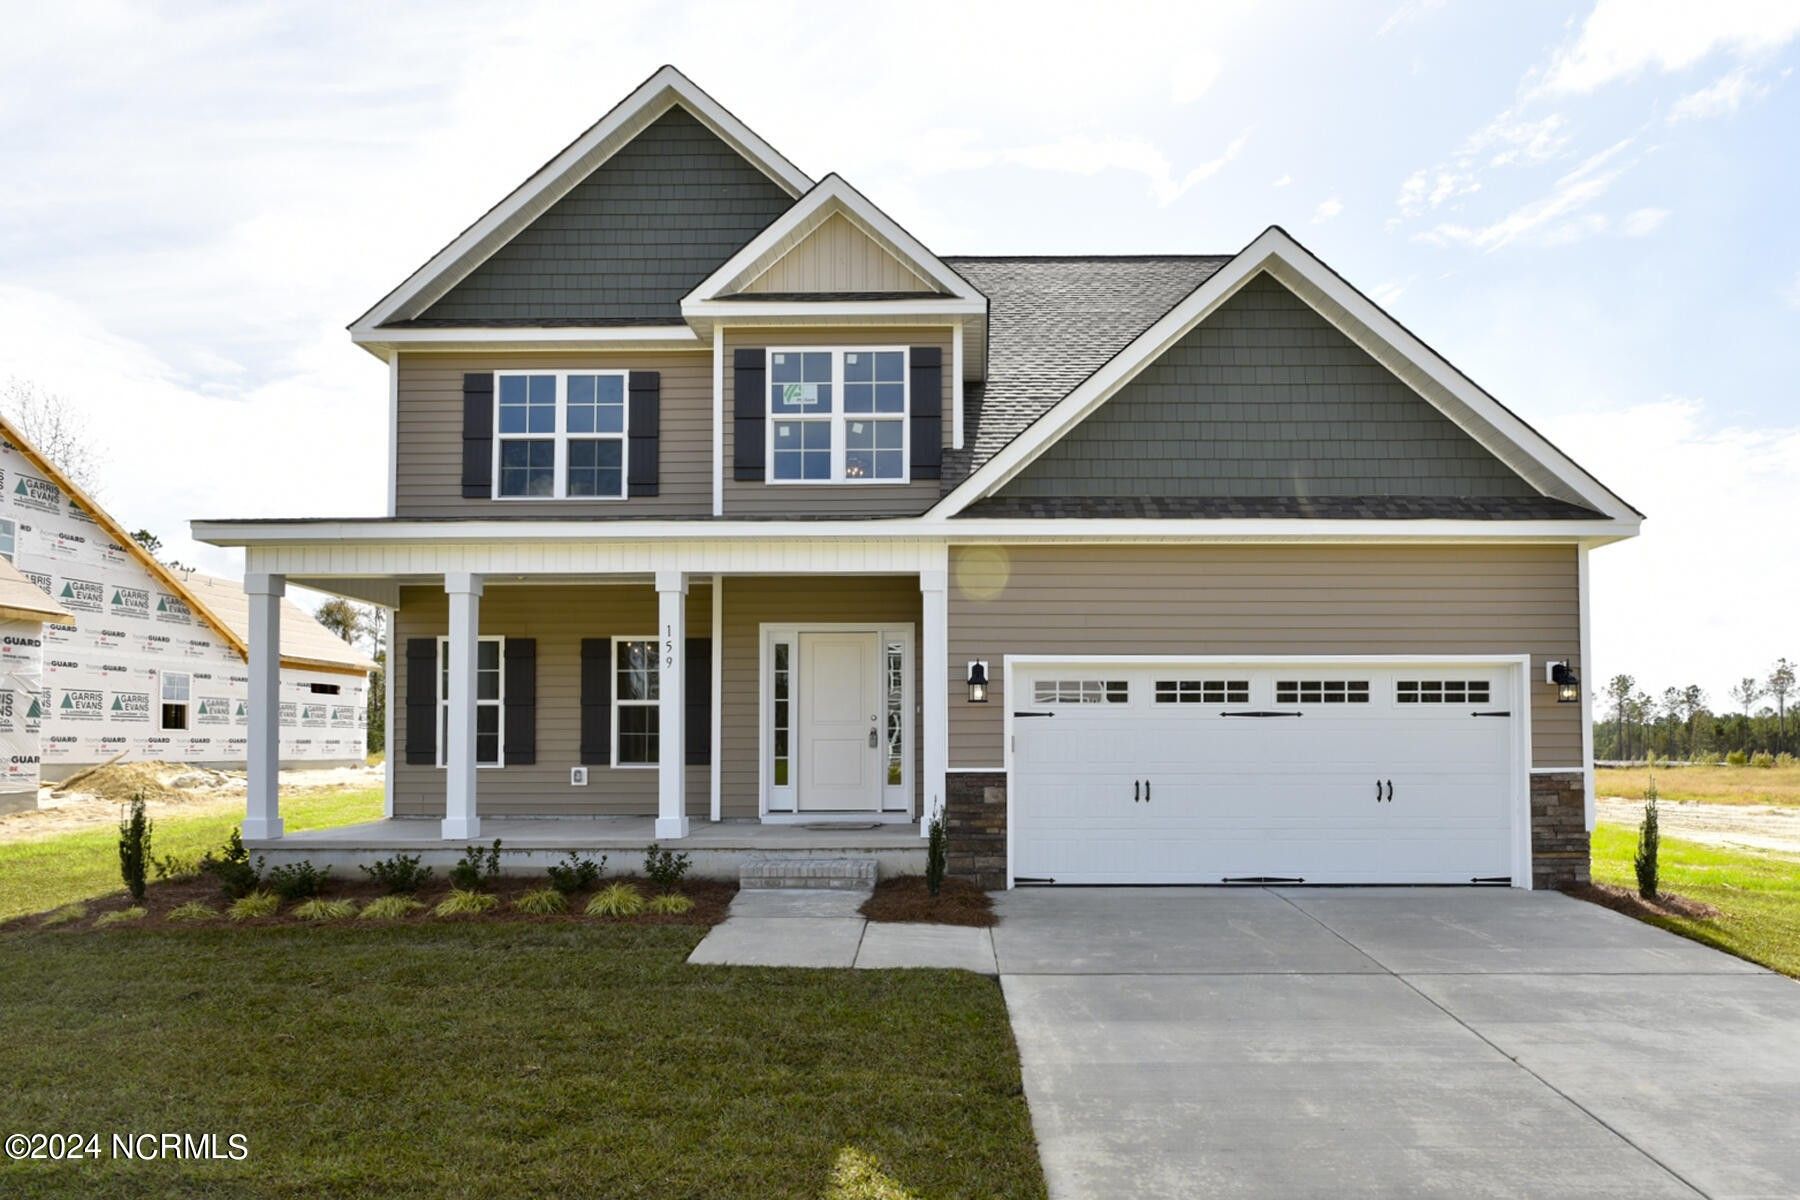 471 Northern Pintail Place. Hampstead, NC 28443